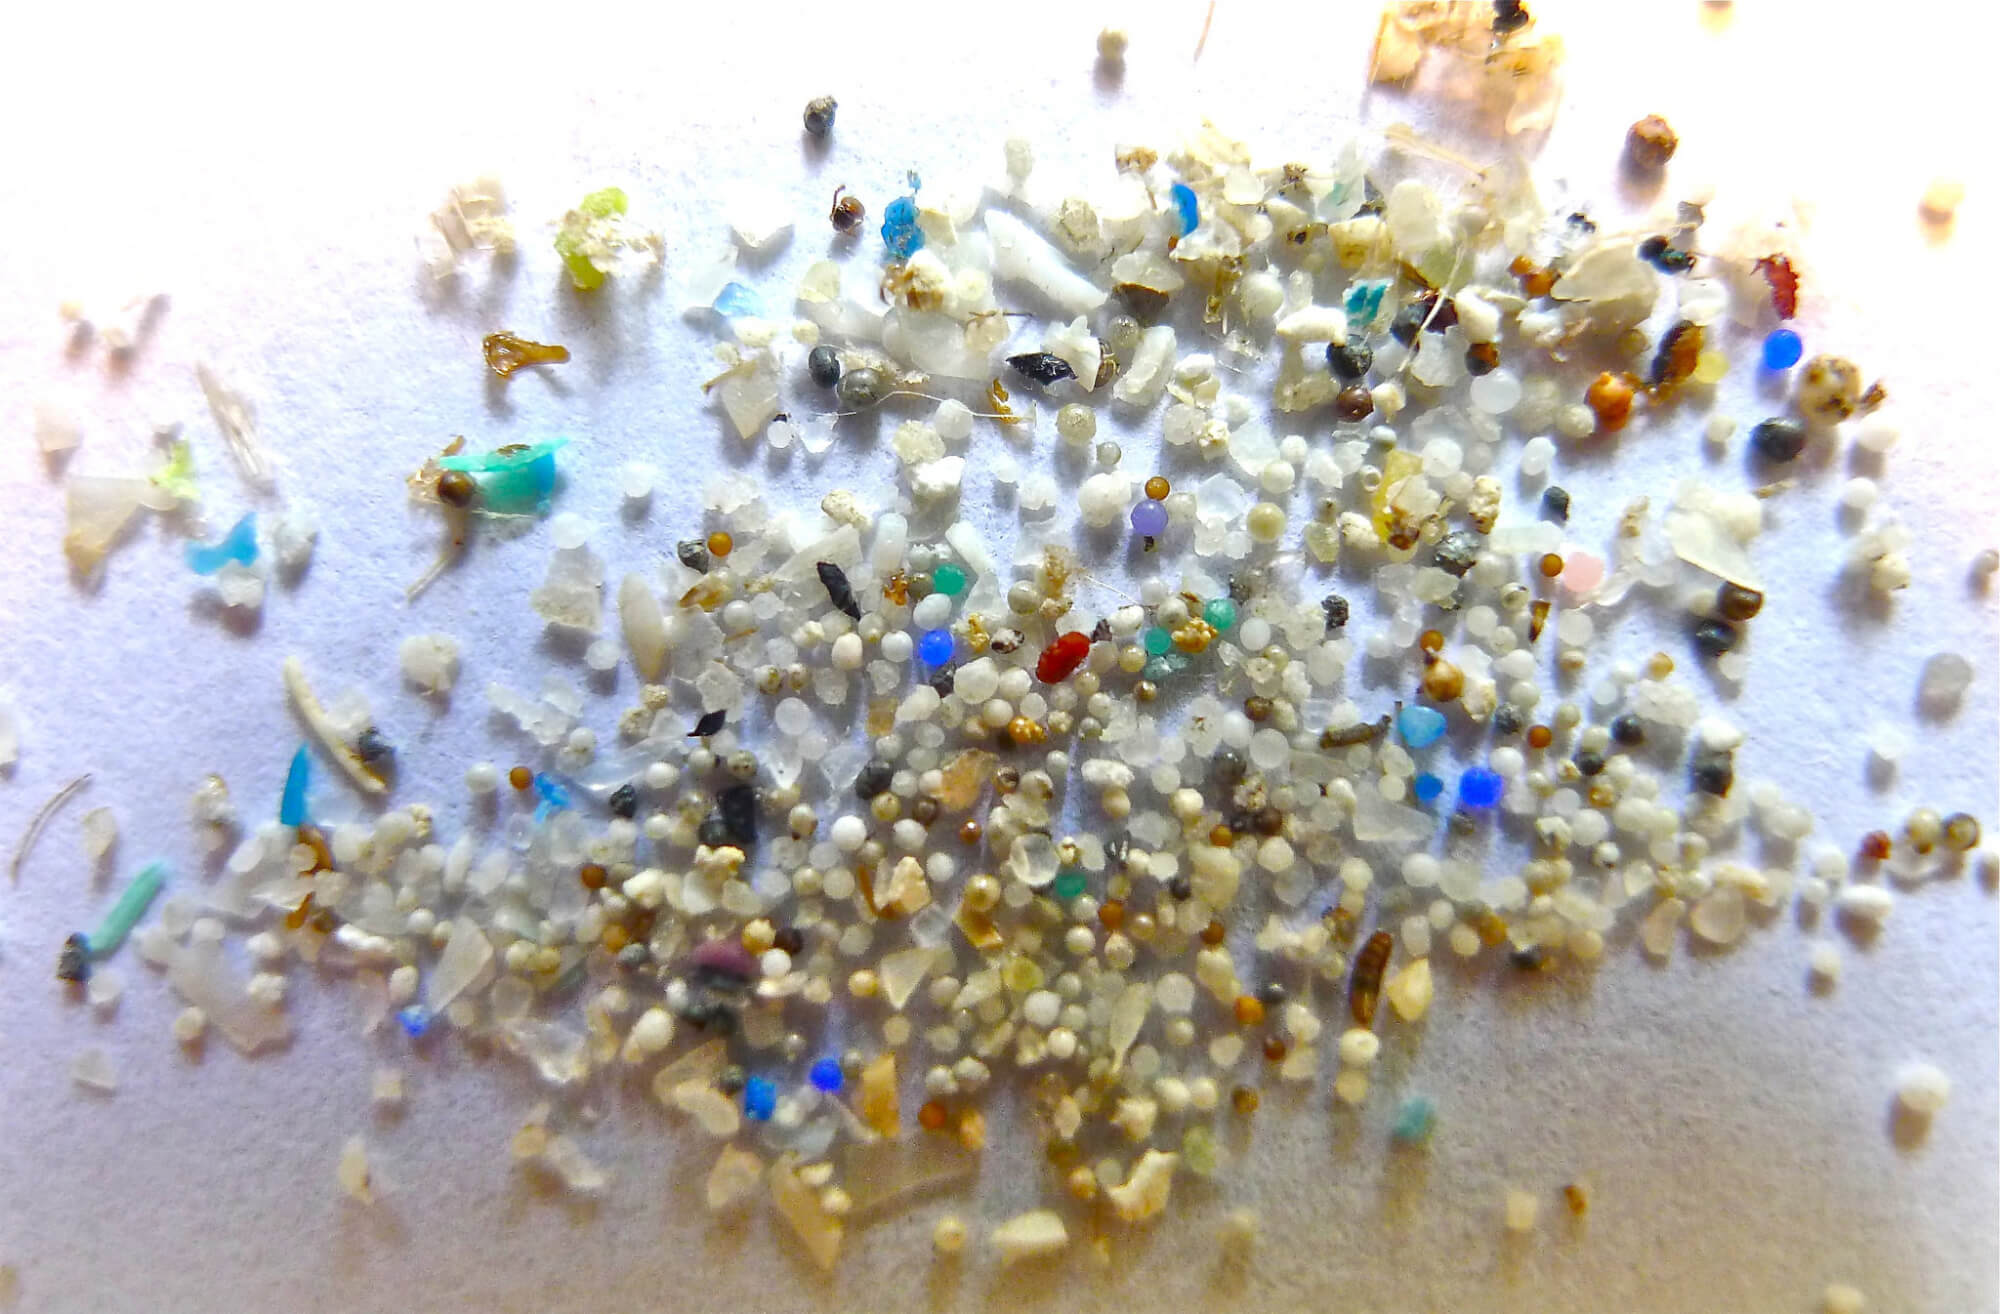 Small plastic particles